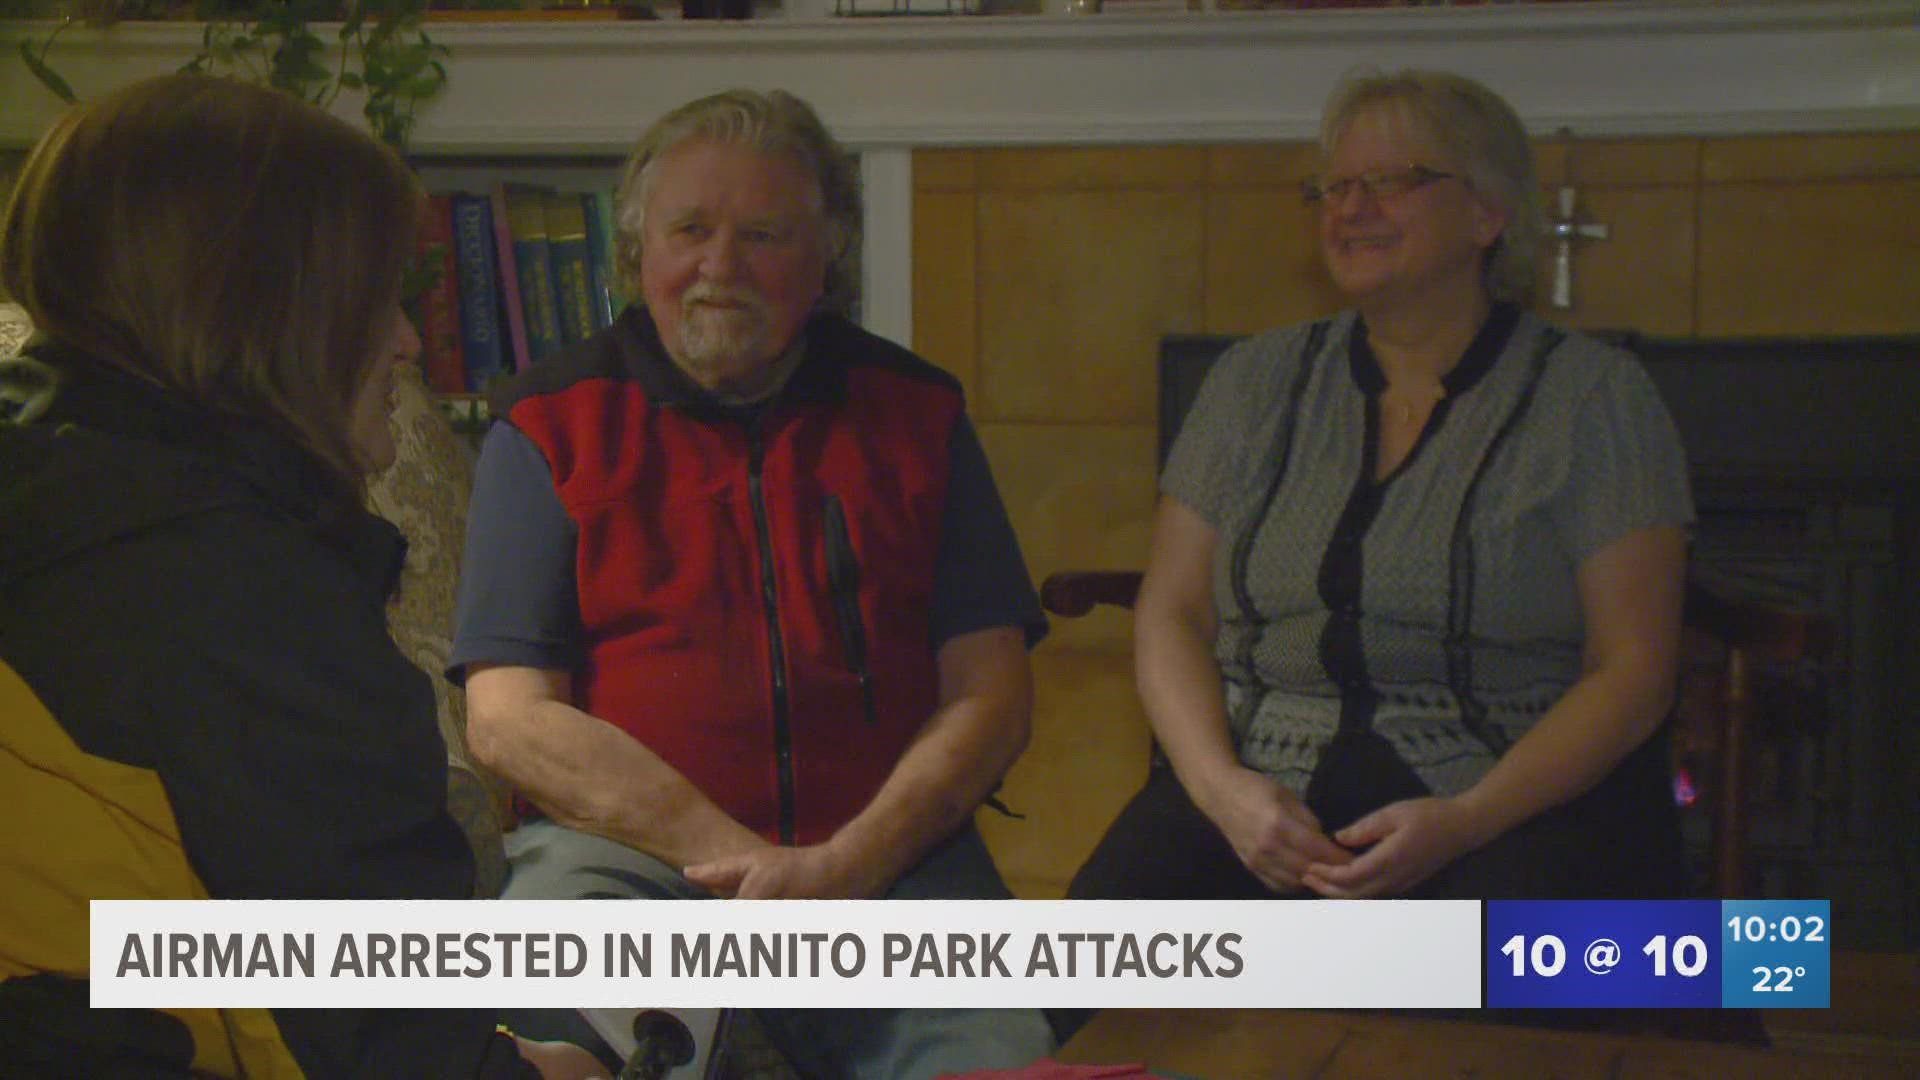 Terry Shanahan and Gina Cook, who have lived next to Manito Park for 25 years, don't think the recent assaults should dissuade people from visiting the park.